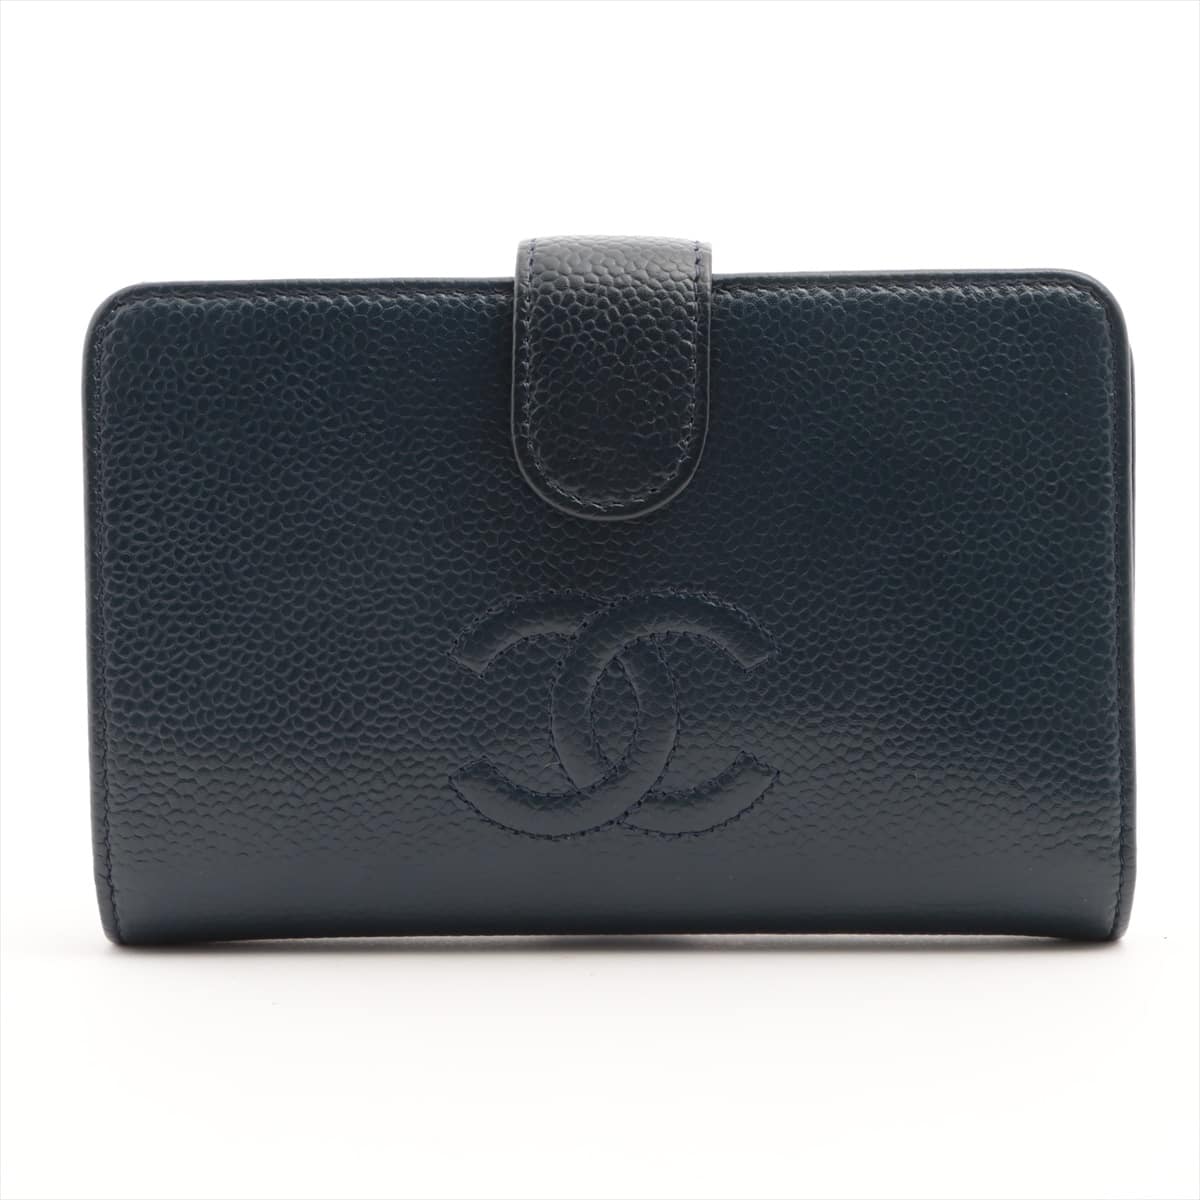 Chanel Coco Mark Caviarskin Compact Wallet Navy blue Silver Metal fittings 15XXXXXX